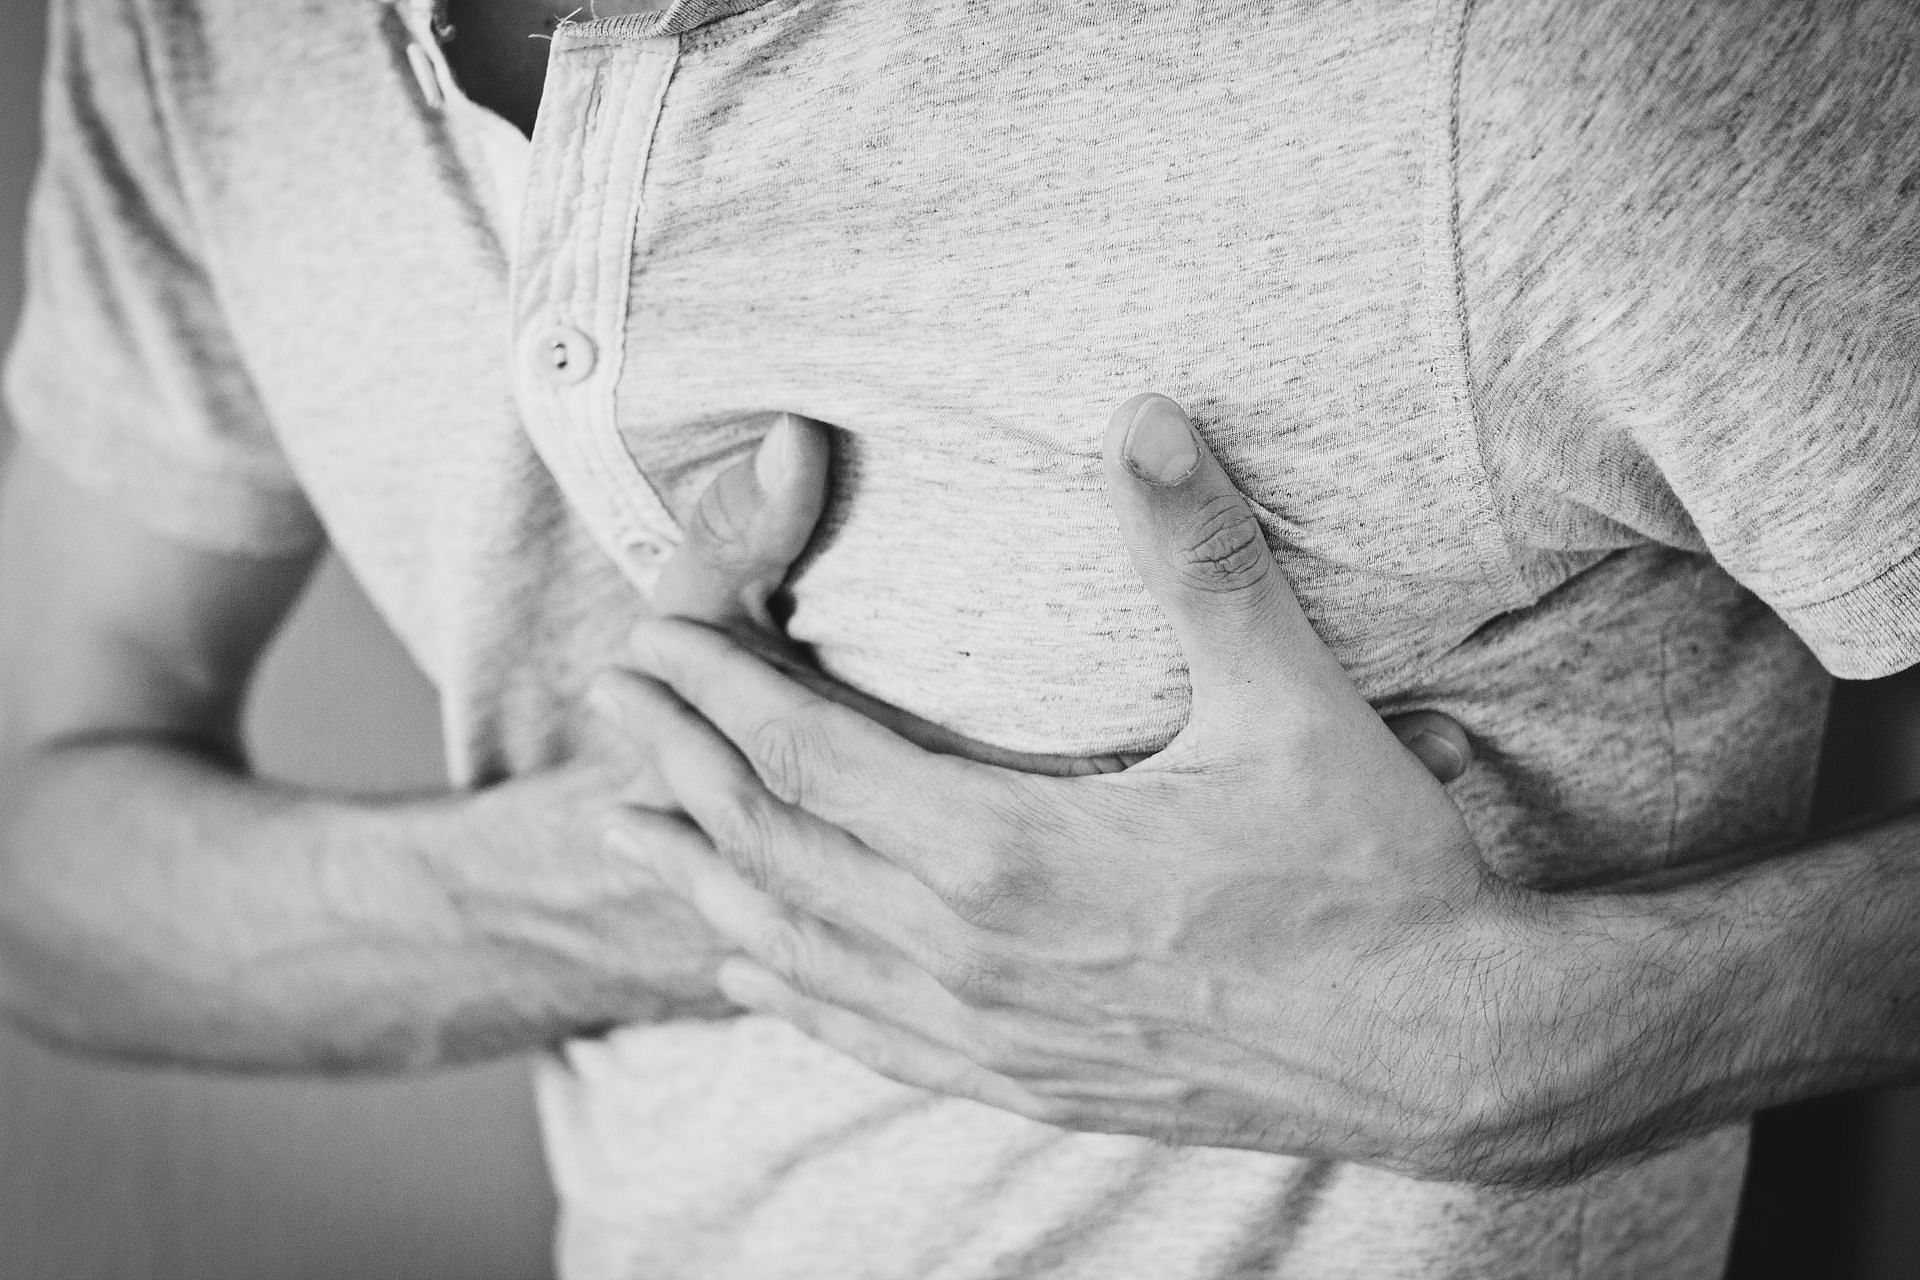 A tight chest could be caused by several underlying health issues, don